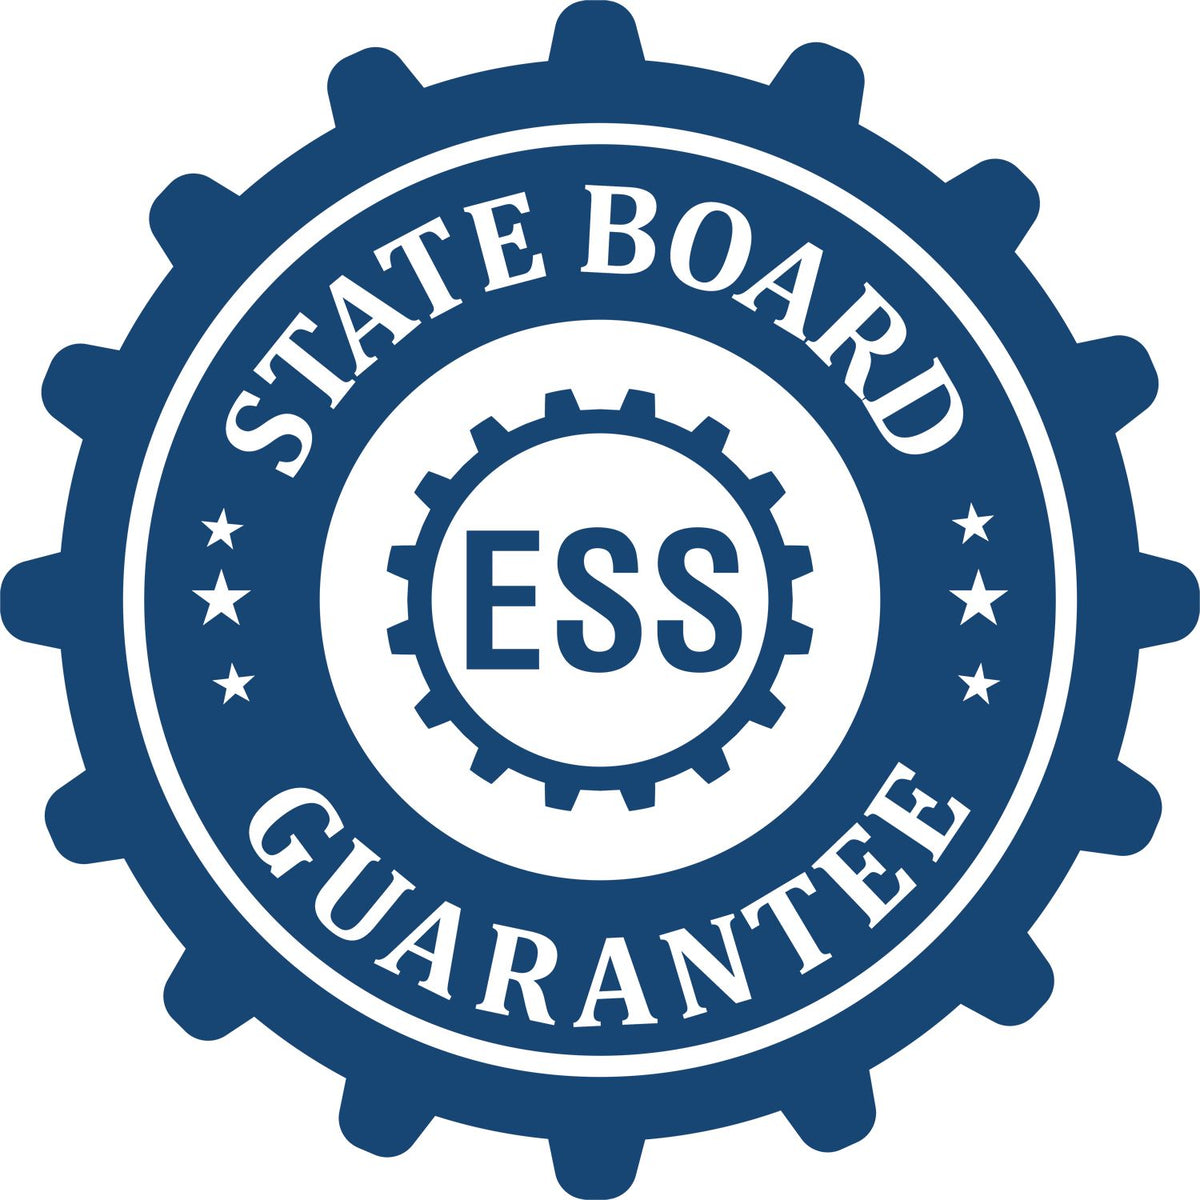 An emblem in a gear shape illustrating a state board guarantee for the Hawaii Landscape Architectural Seal Stamp product.